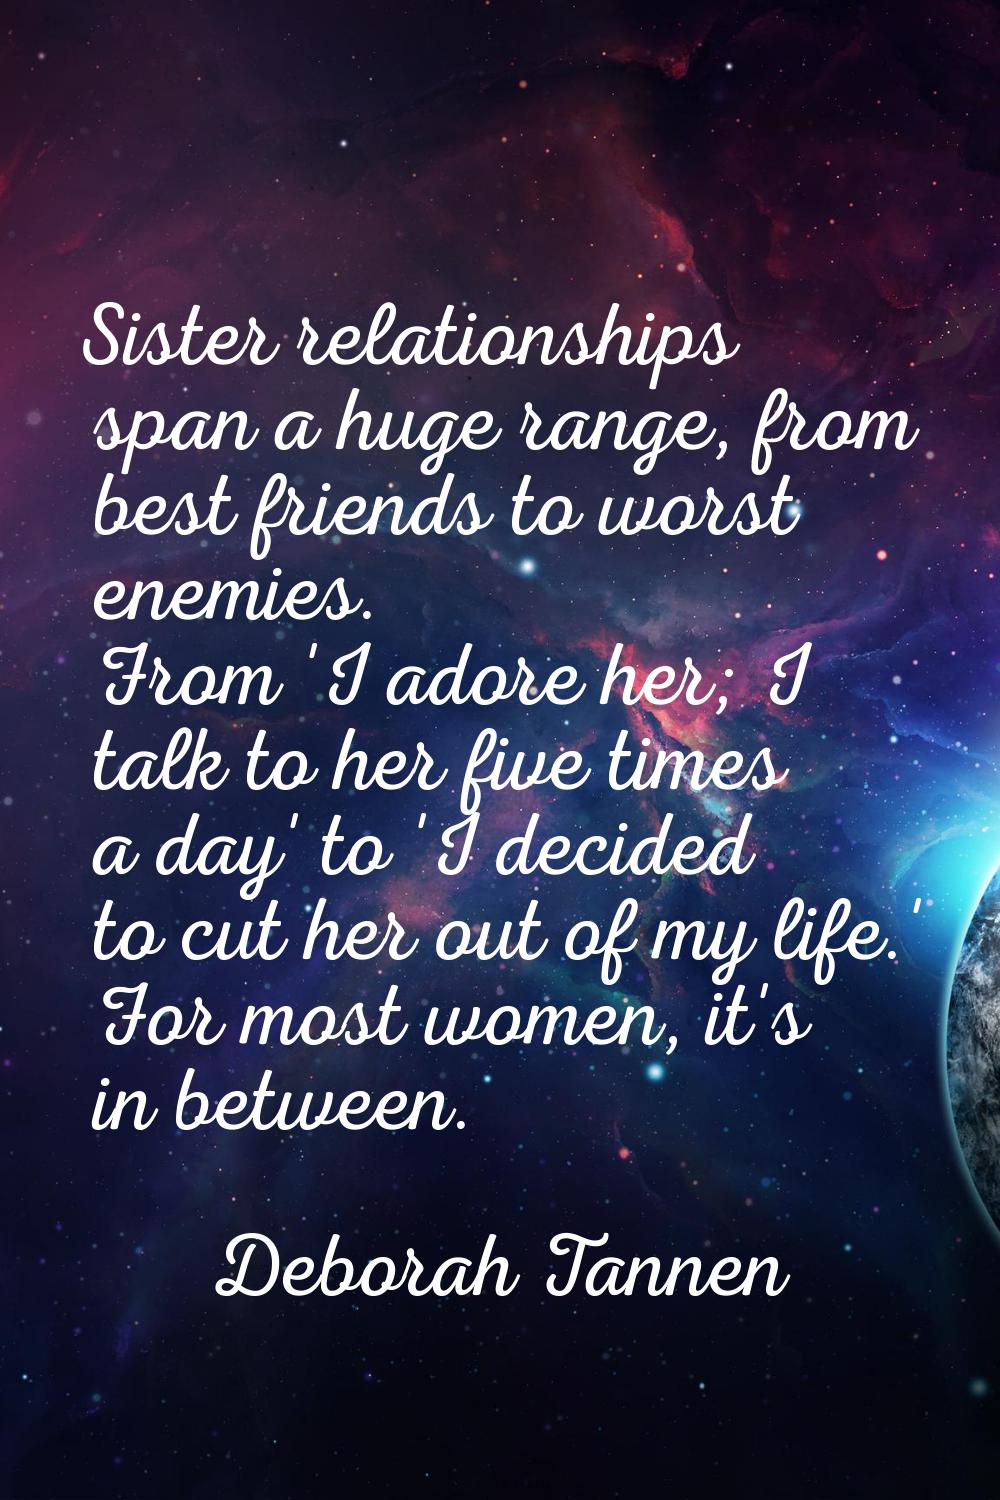 Sister relationships span a huge range, from best friends to worst enemies. From 'I adore her; I ta